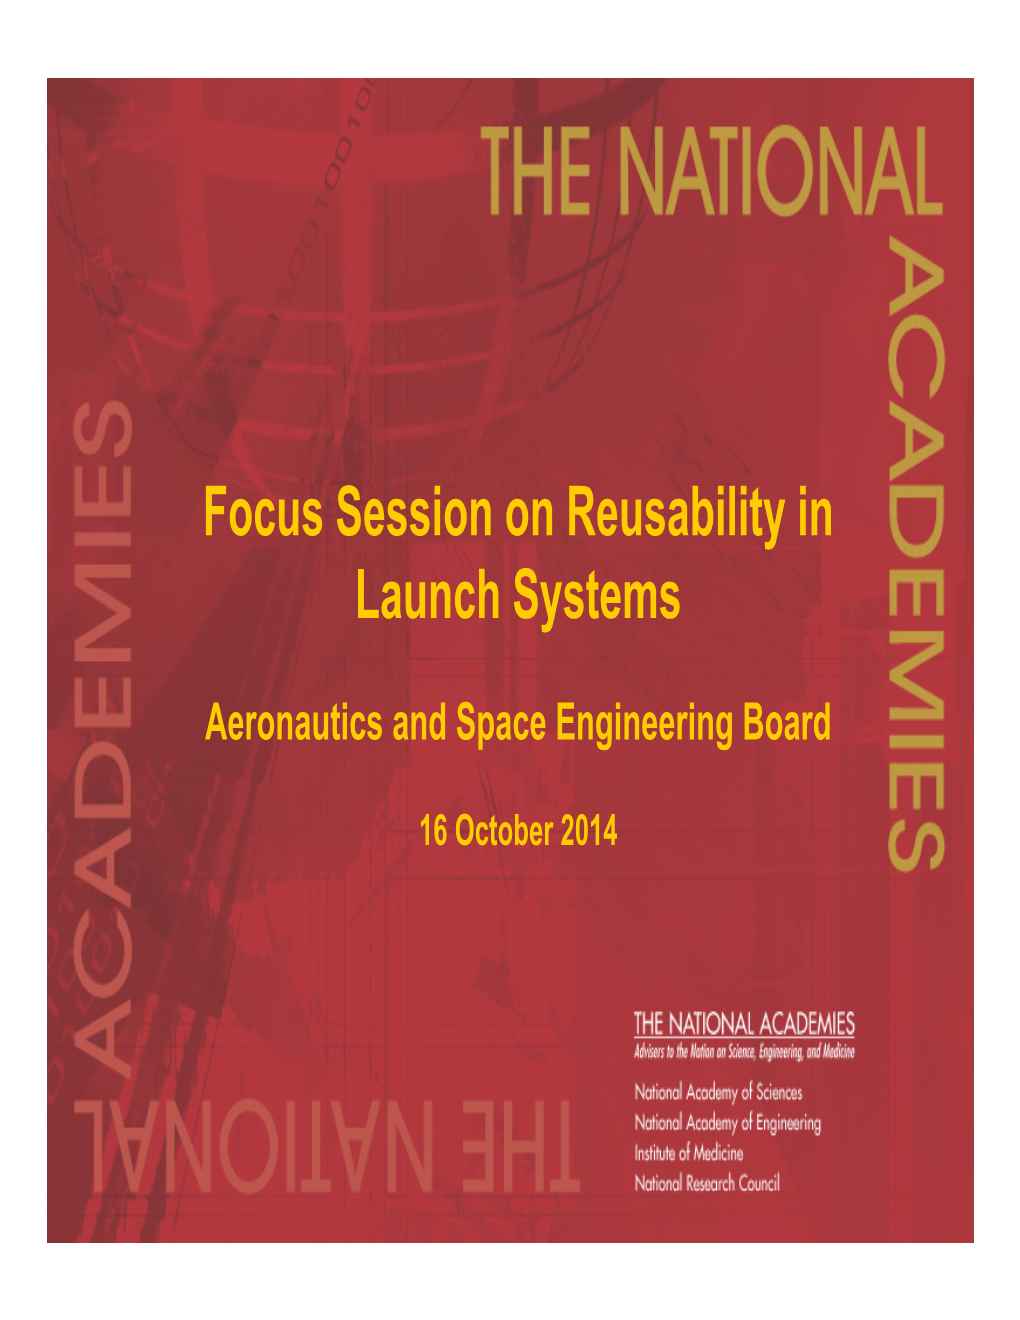 Focus Session on Reusability in Launch Systems